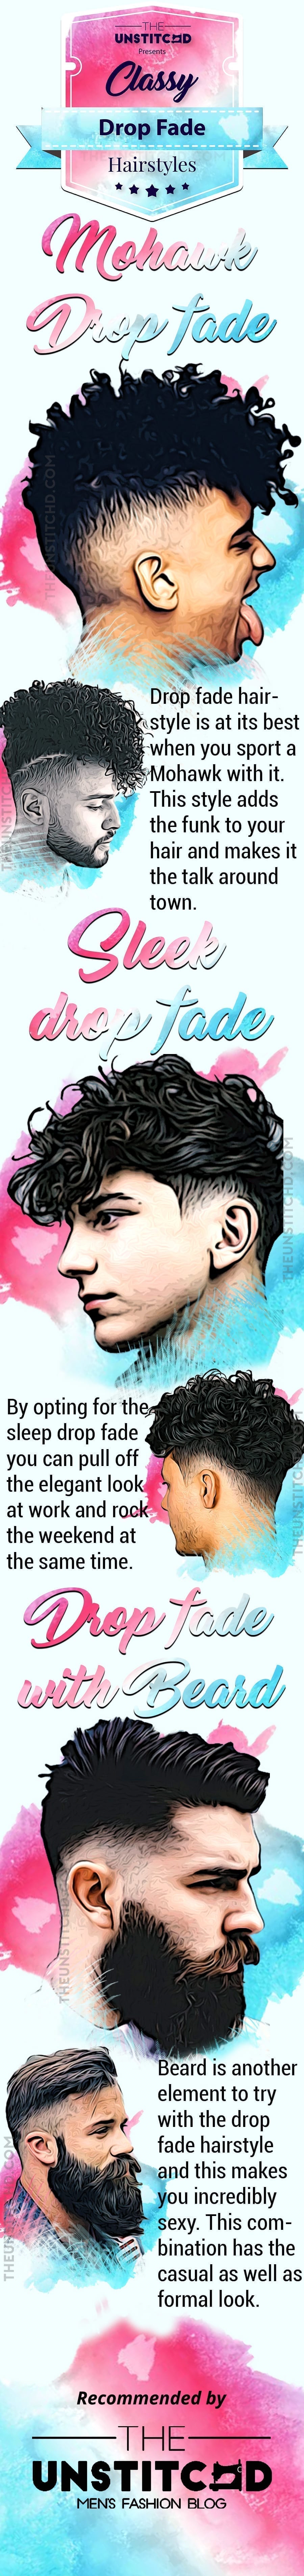 Drop-fade-hairstyle-info